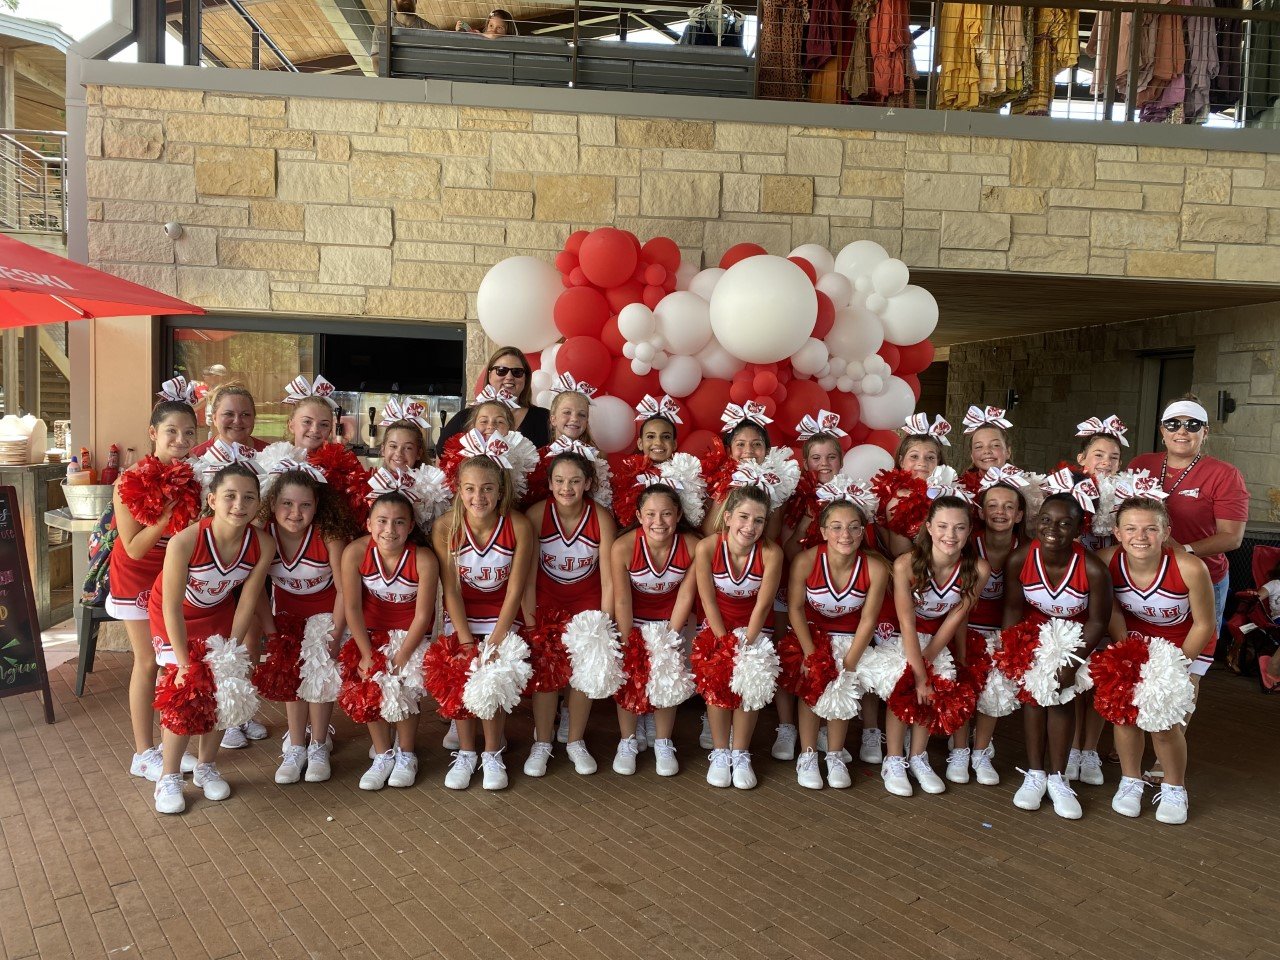 The Katy Junior High cheer squad will perform at the Cane Island End of Summer Bash.